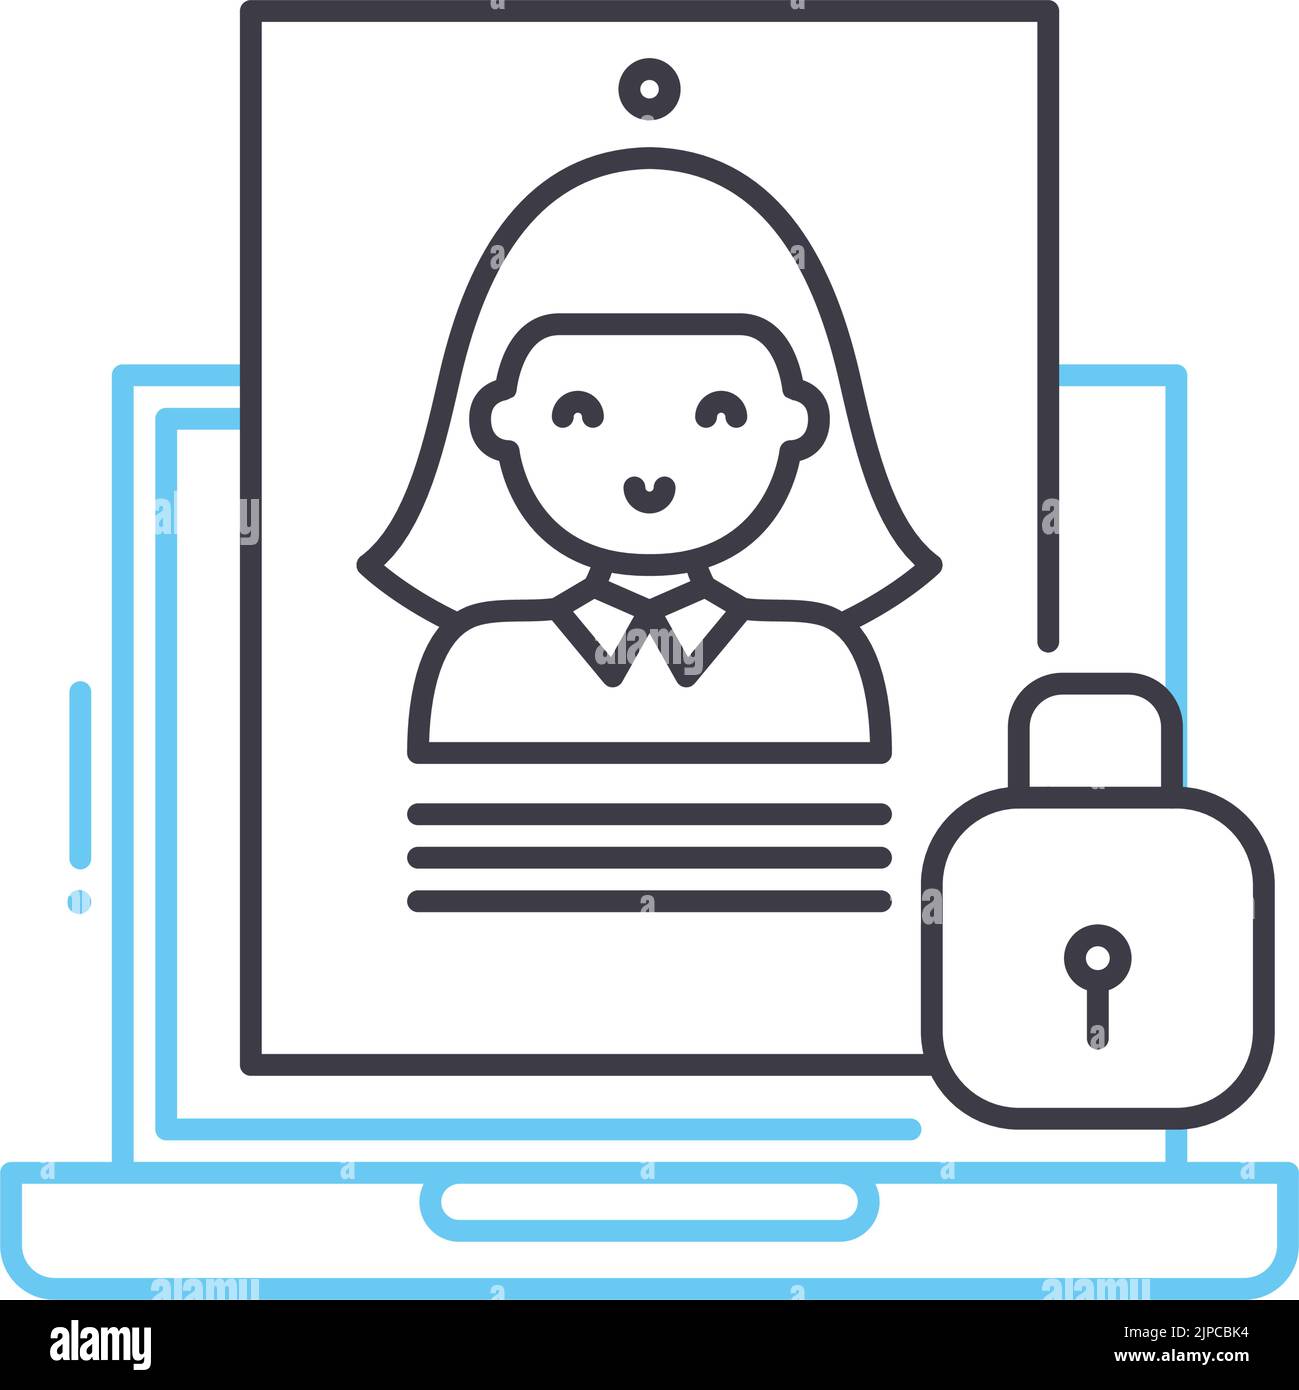 personal information line icon, outline symbol, vector illustration, concept sign Stock Vector